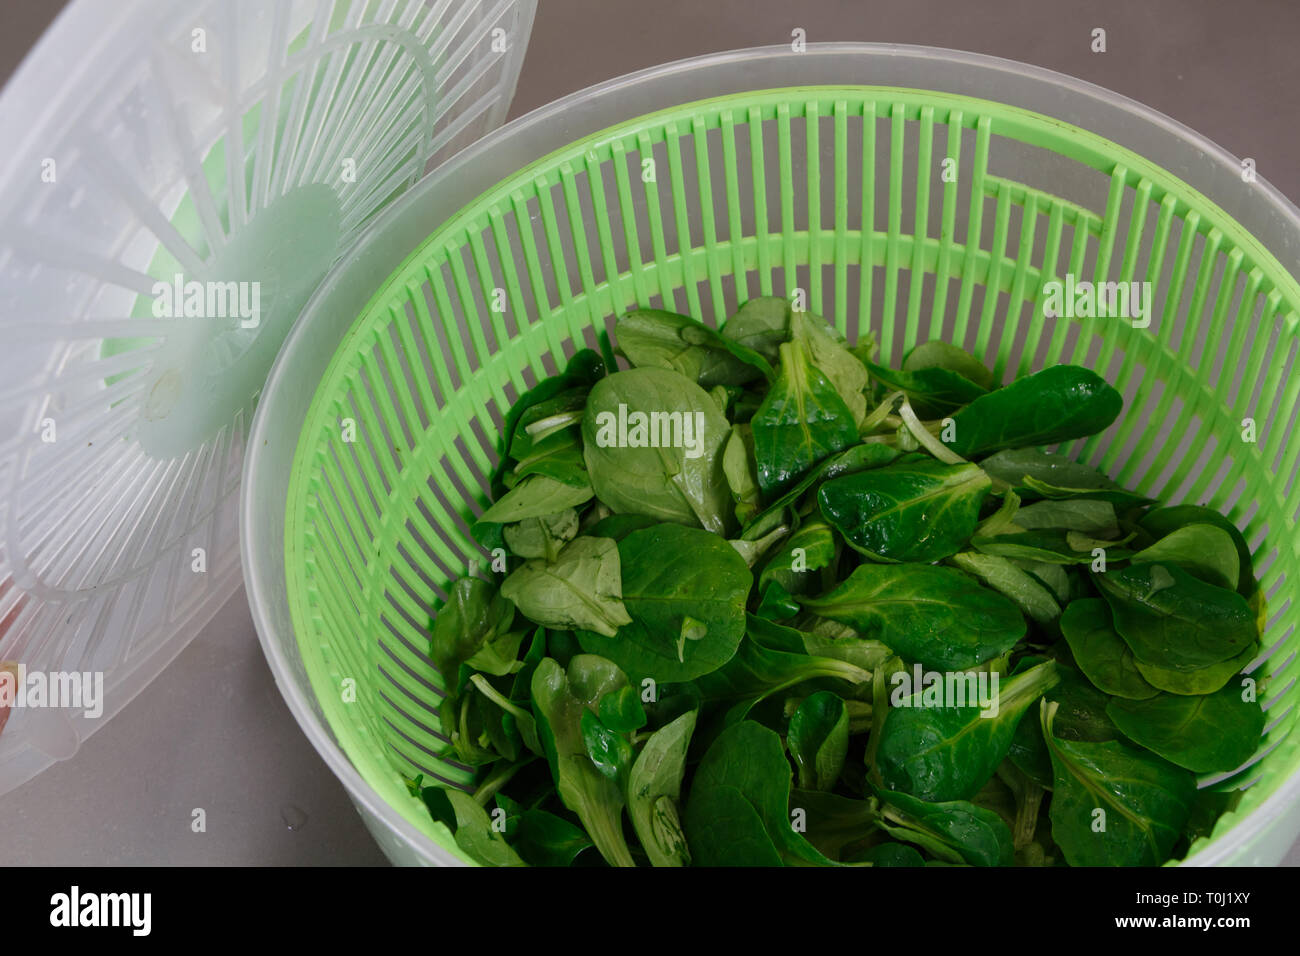 Lamb's lettuce in a salad spinner after washing with water Stock Photo